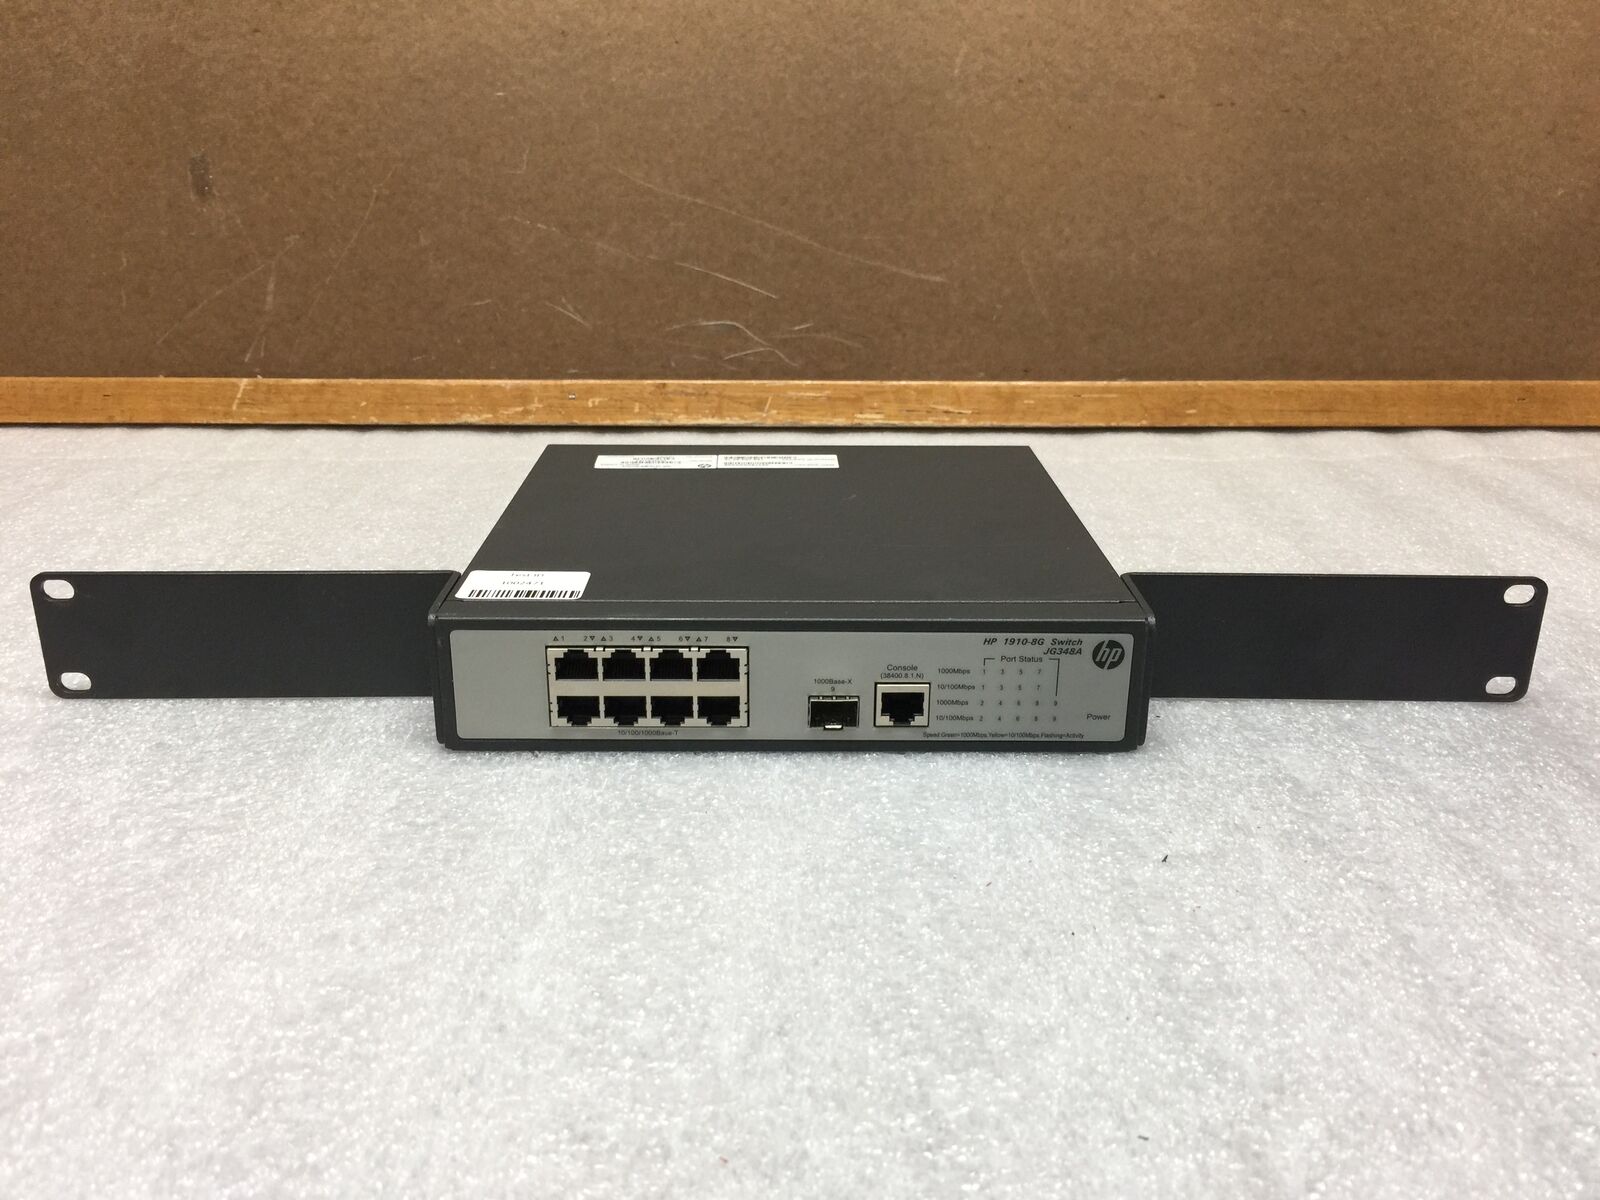 HP JG348A 1910-8G 8-Port Gigabit Managed Ethernet Switch, Tested and Working